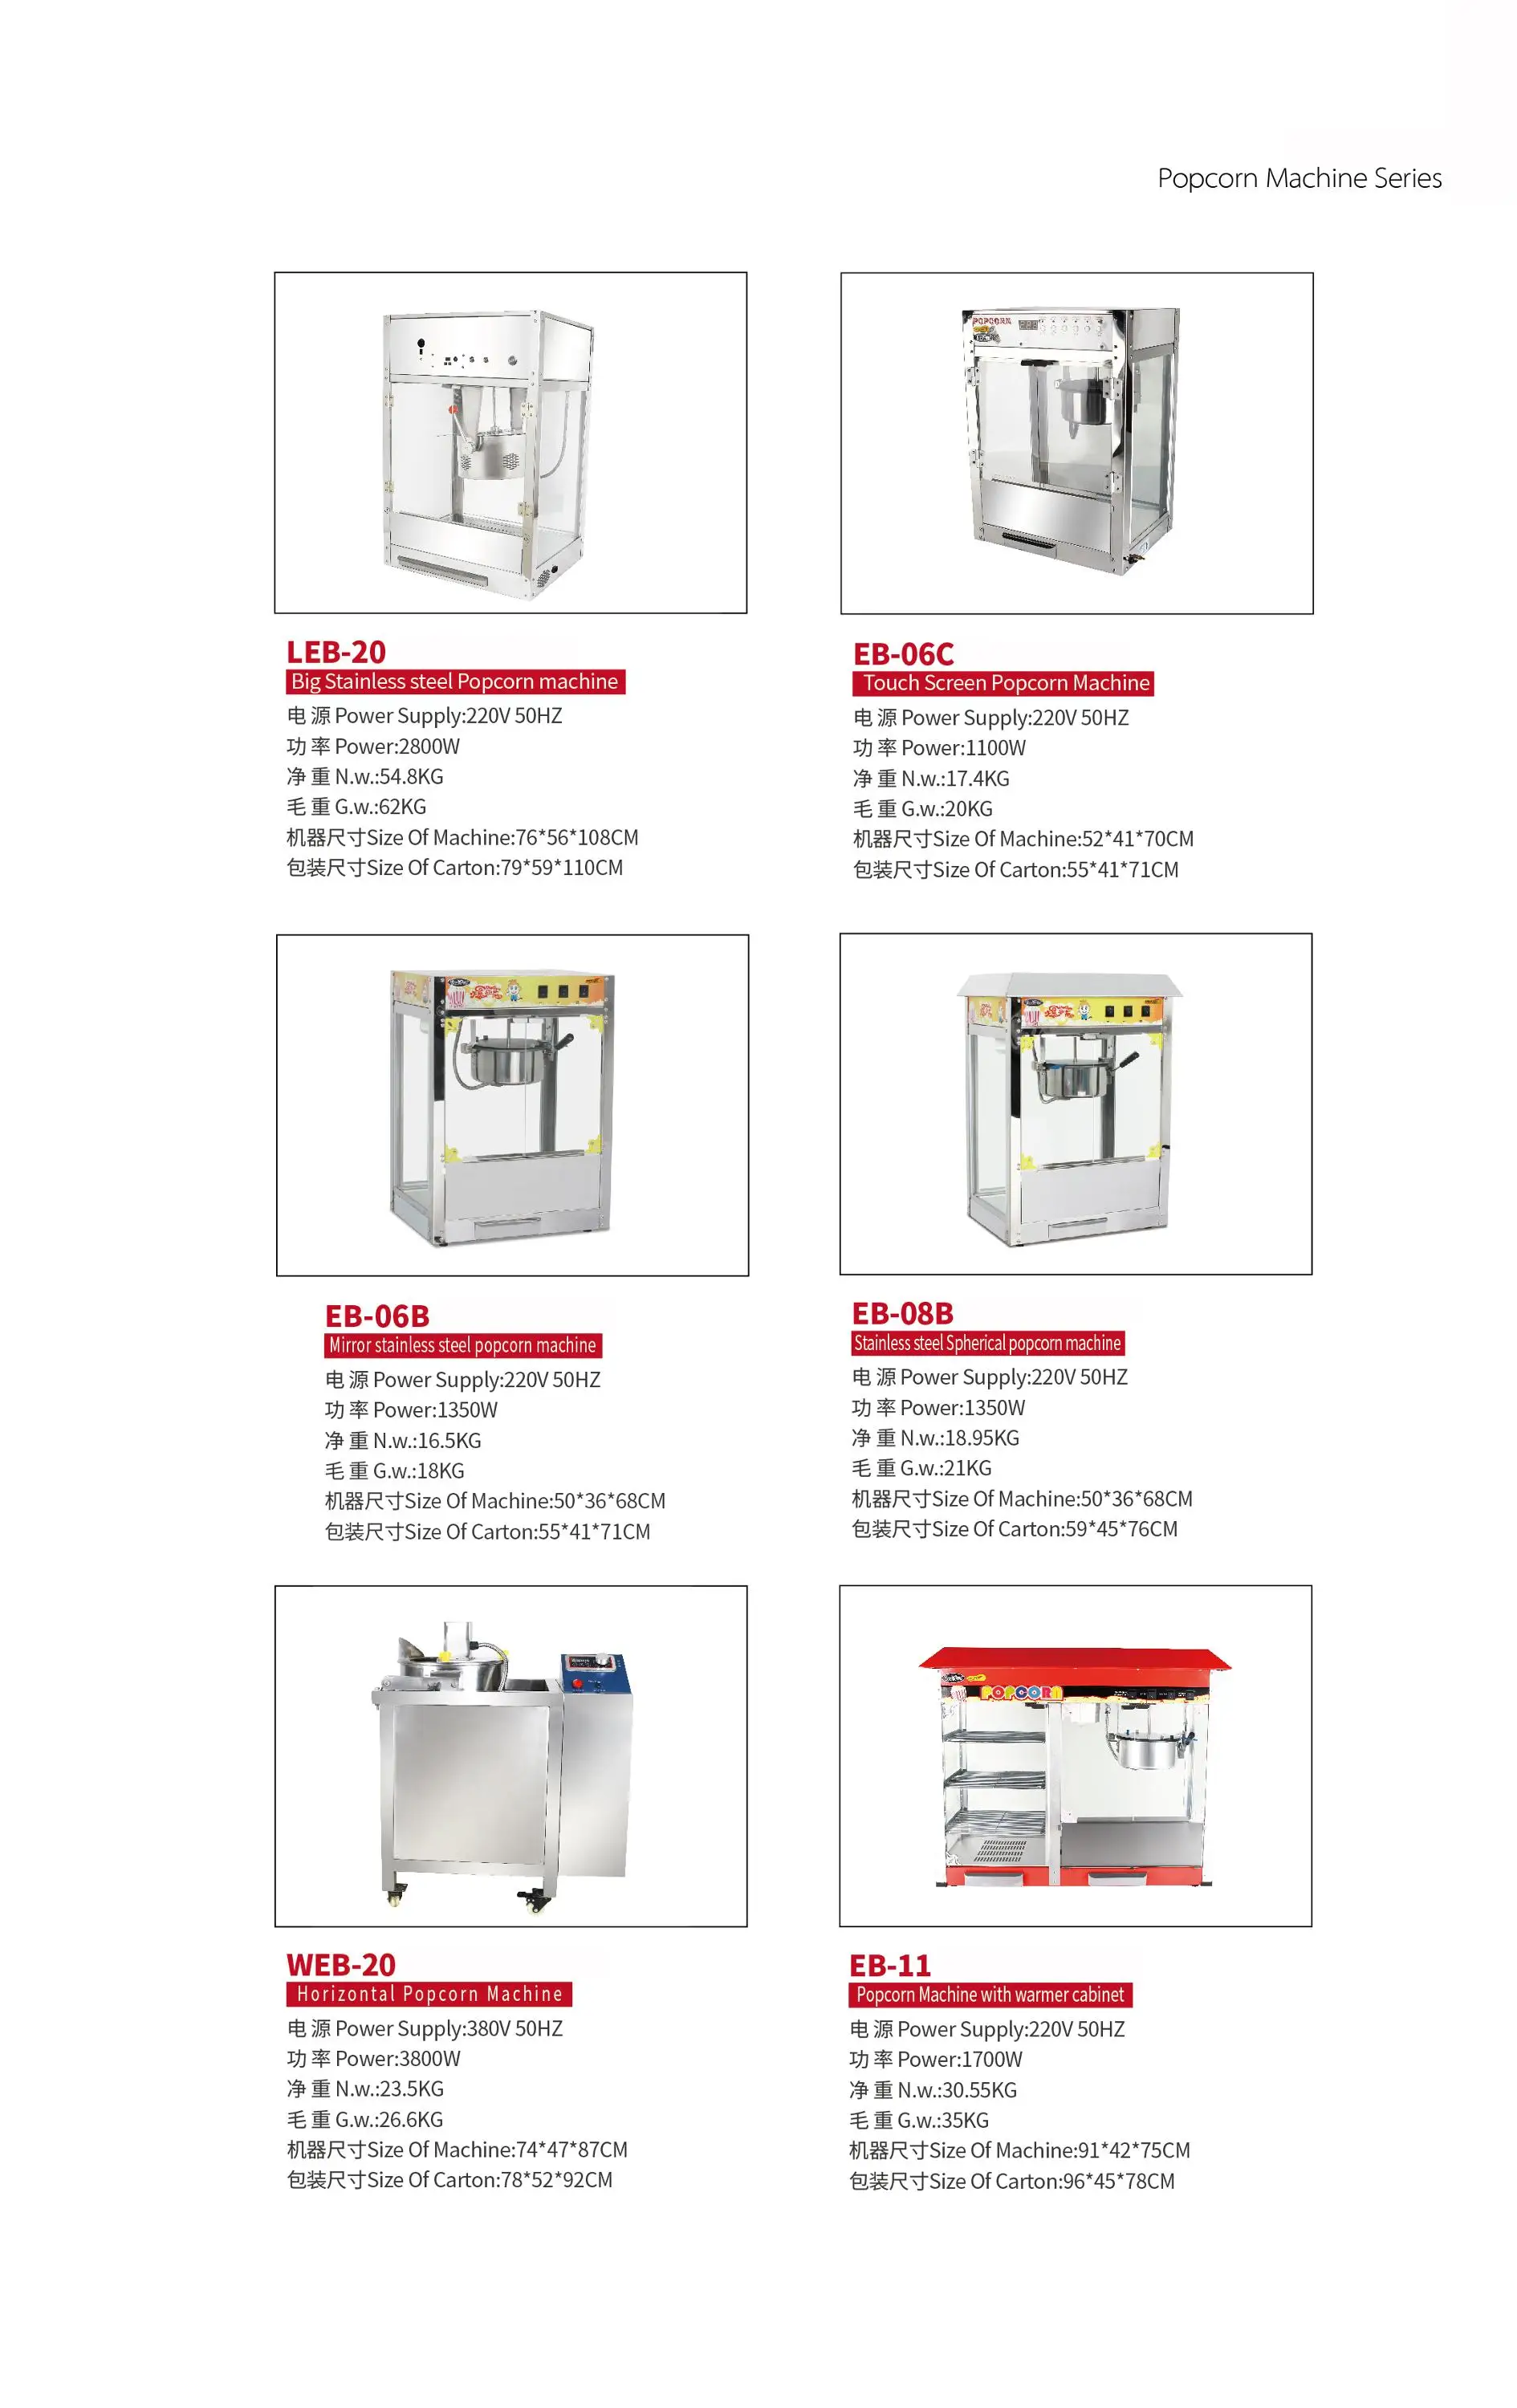 Fully Automatic Gas Popcorn Machine Large Spherical Popcorn Machine Electric Stirring With Battery